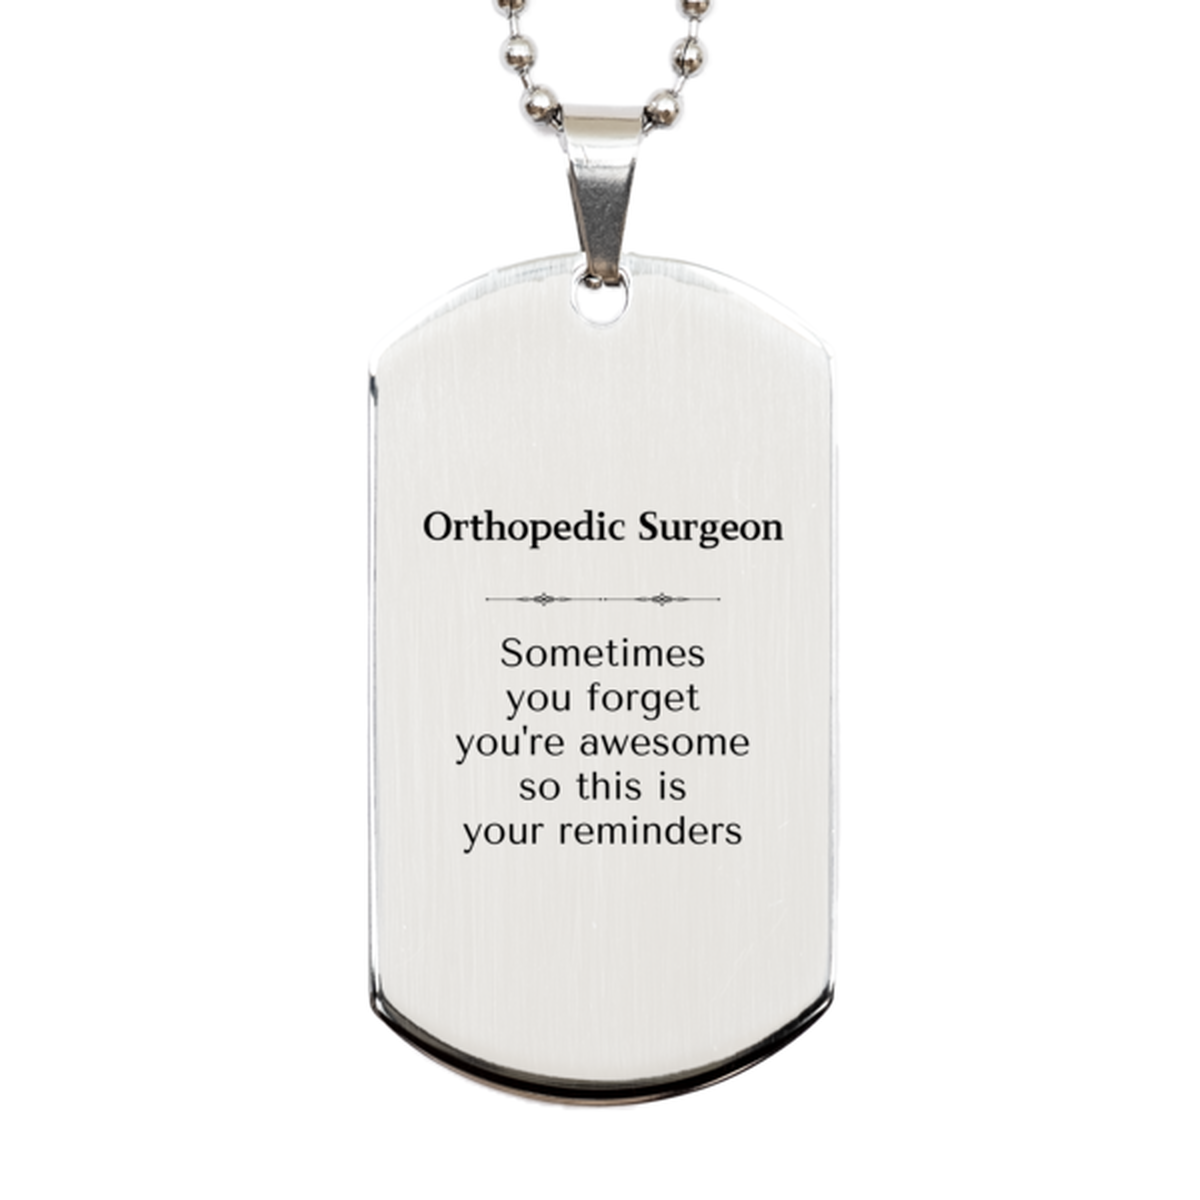 Sentimental Orthopedic Surgeon Silver Dog Tag, Orthopedic Surgeon Sometimes you forget you're awesome so this is your reminders, Graduation Christmas Birthday Gifts for Orthopedic Surgeon, Men, Women, Coworkers